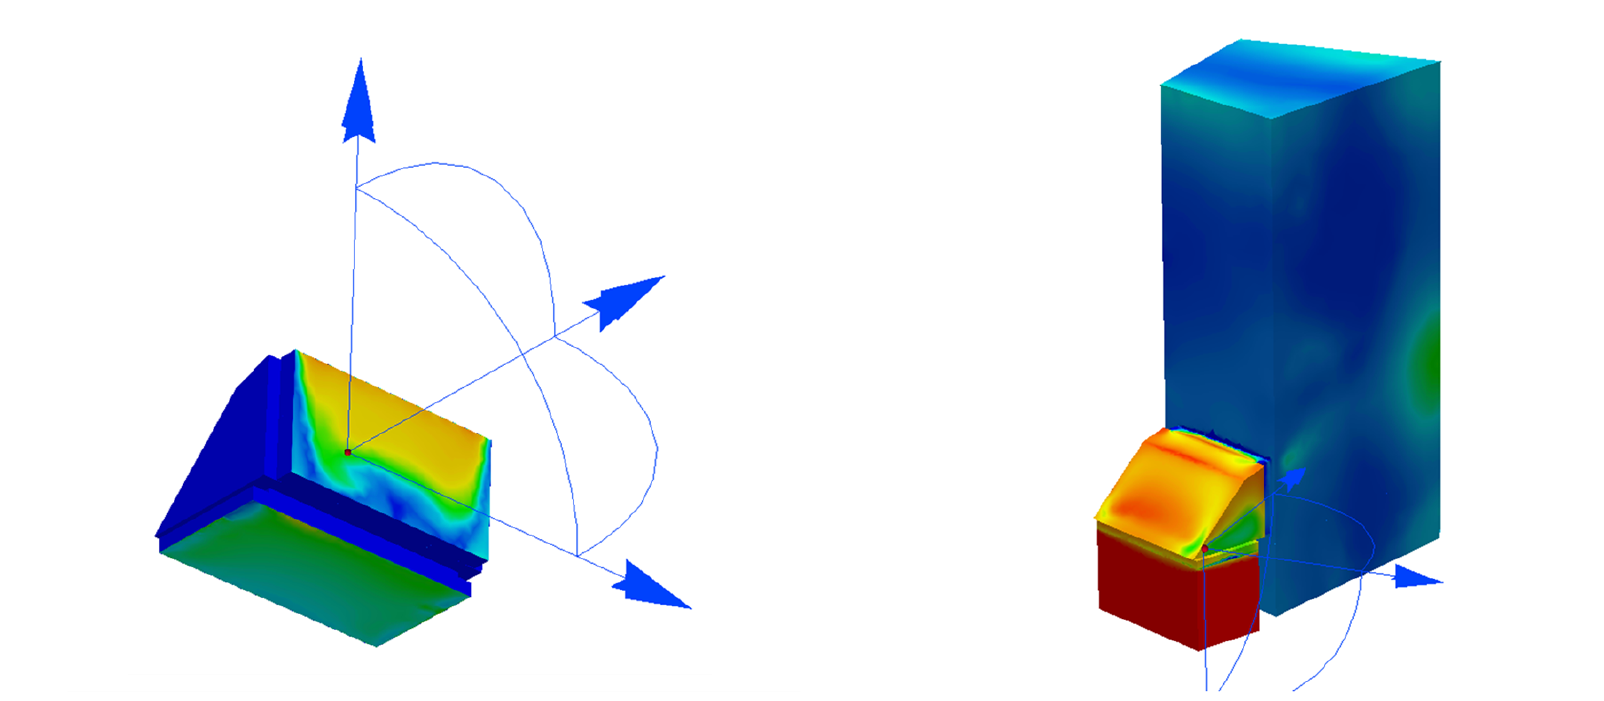 In the CFD generated image on the left, the velocity magnitude is contoured over the relief gate fluid volume geometry.  In the image on the right, the static pressure is contoured over the relief gate fluid volume geometry as well as the adjacent fluid volumes.